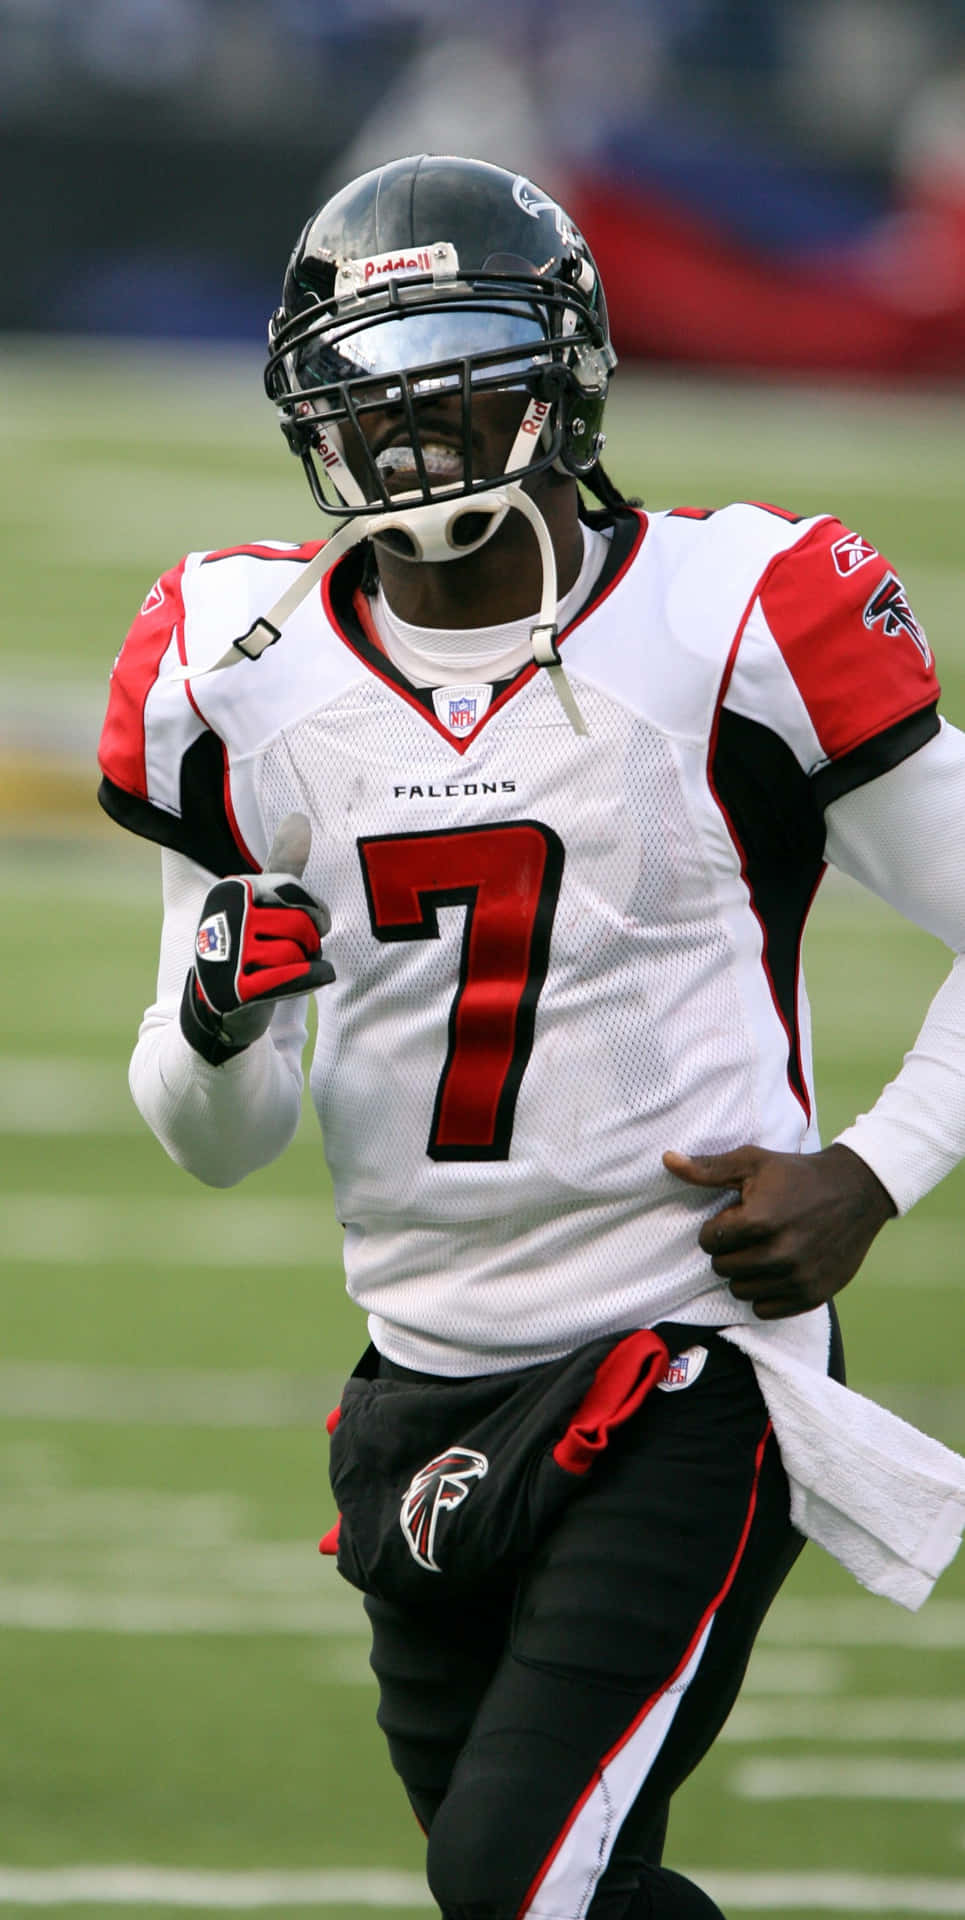 Michael Vick stretching during game day Wallpaper